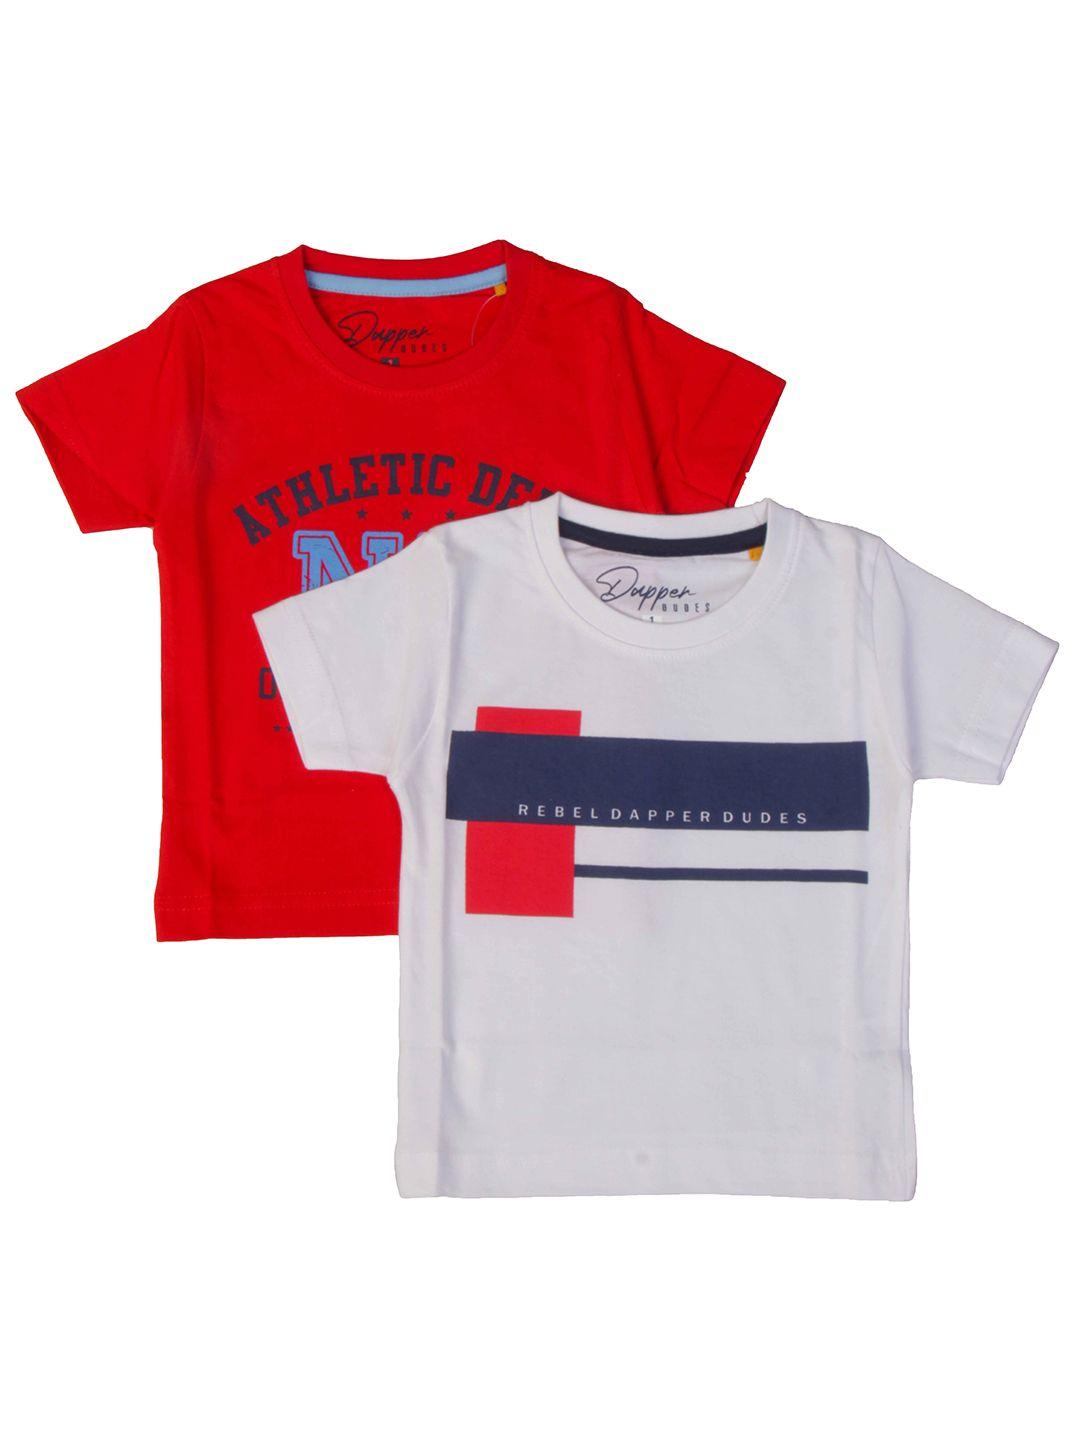 dapper-dudes-boys-pack-of-2-red-&-grey-t-shirts